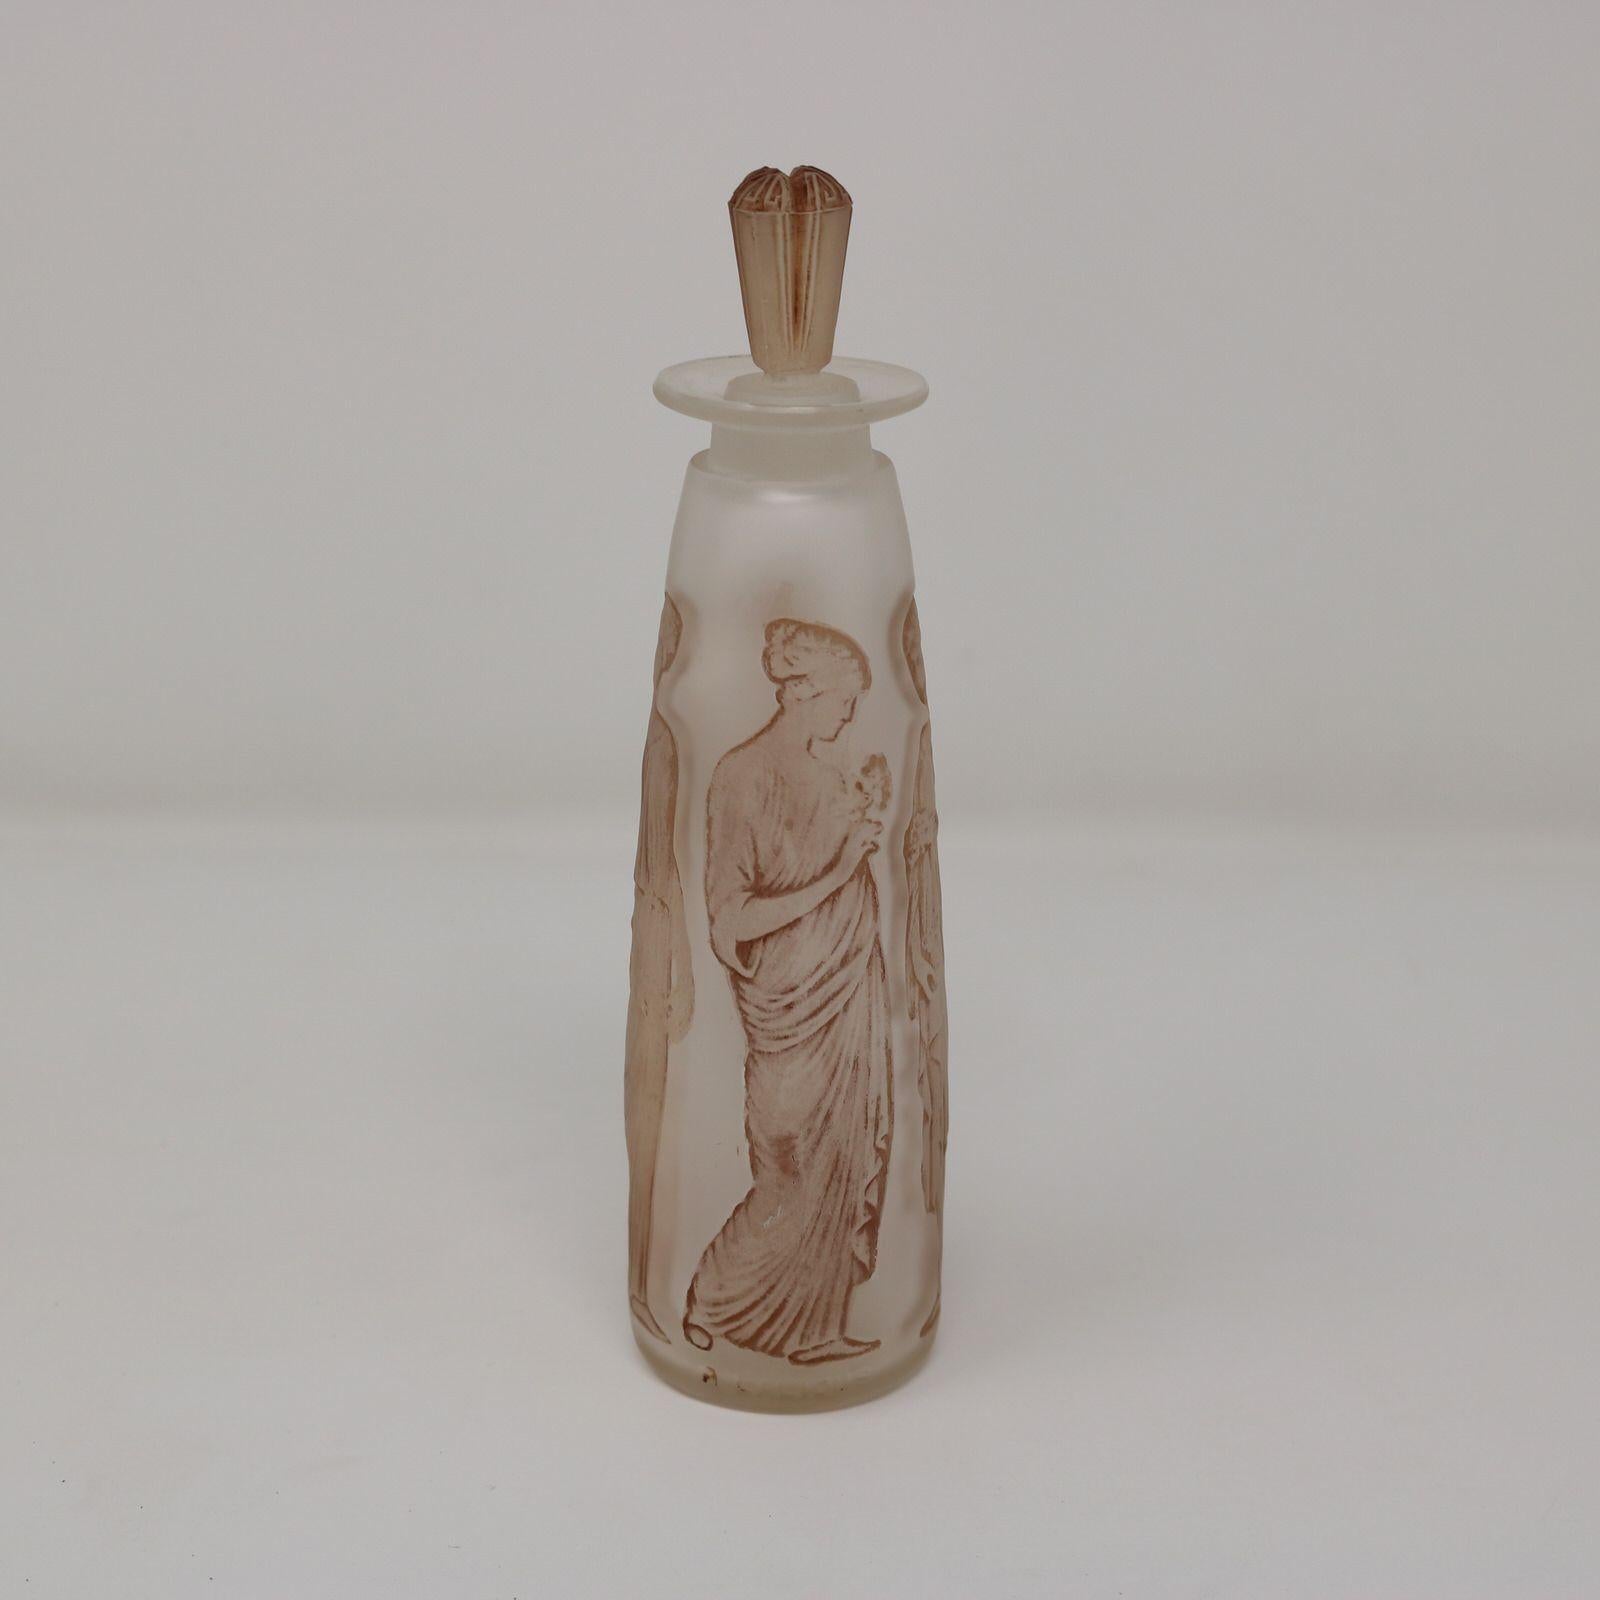 Rene Lalique clear & frosted, sepia stained glass perfume bottle, complete with original box. 'Ambre Antique' design. This design features robed maidens, holding flower bouquets. Moulded makers mark, 'R LALIQUE'. Book reference: 'R. LALIQUE